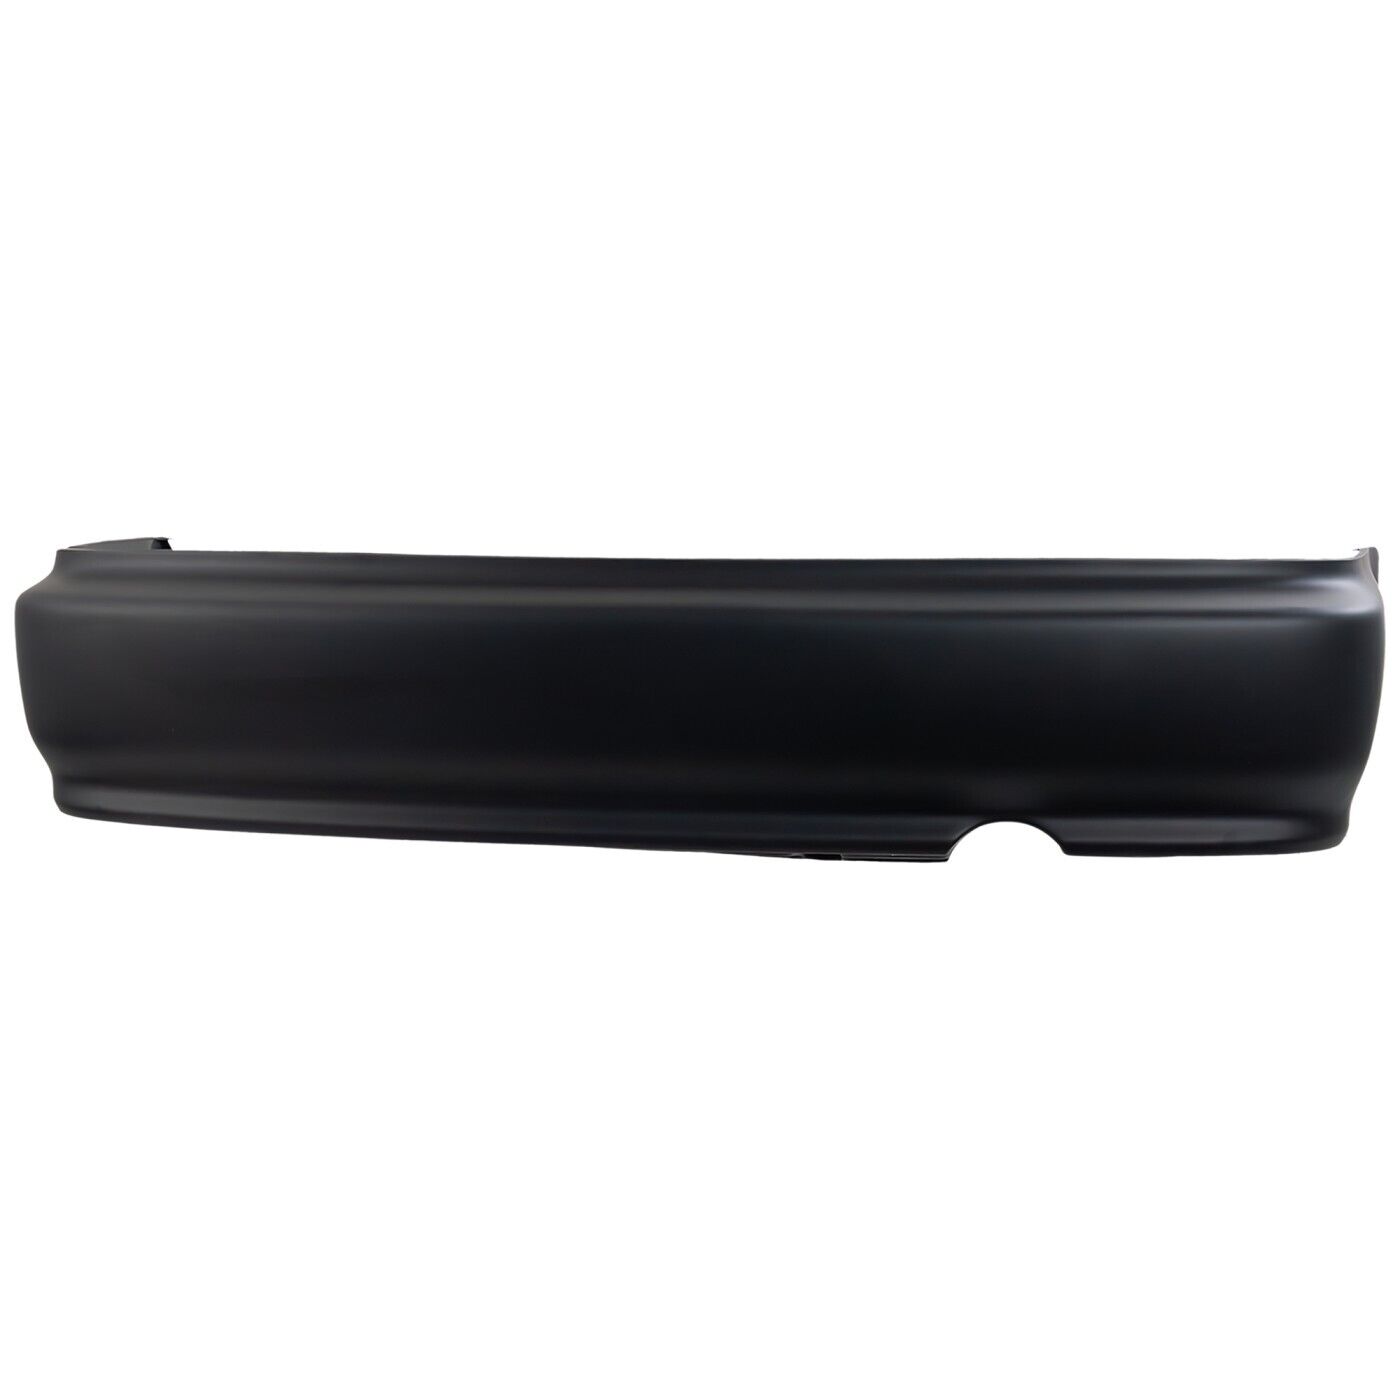 Rear Bumper Cover For 96-00 Honda Civic Primed Sedan Coupe With Exhaust Cut Out